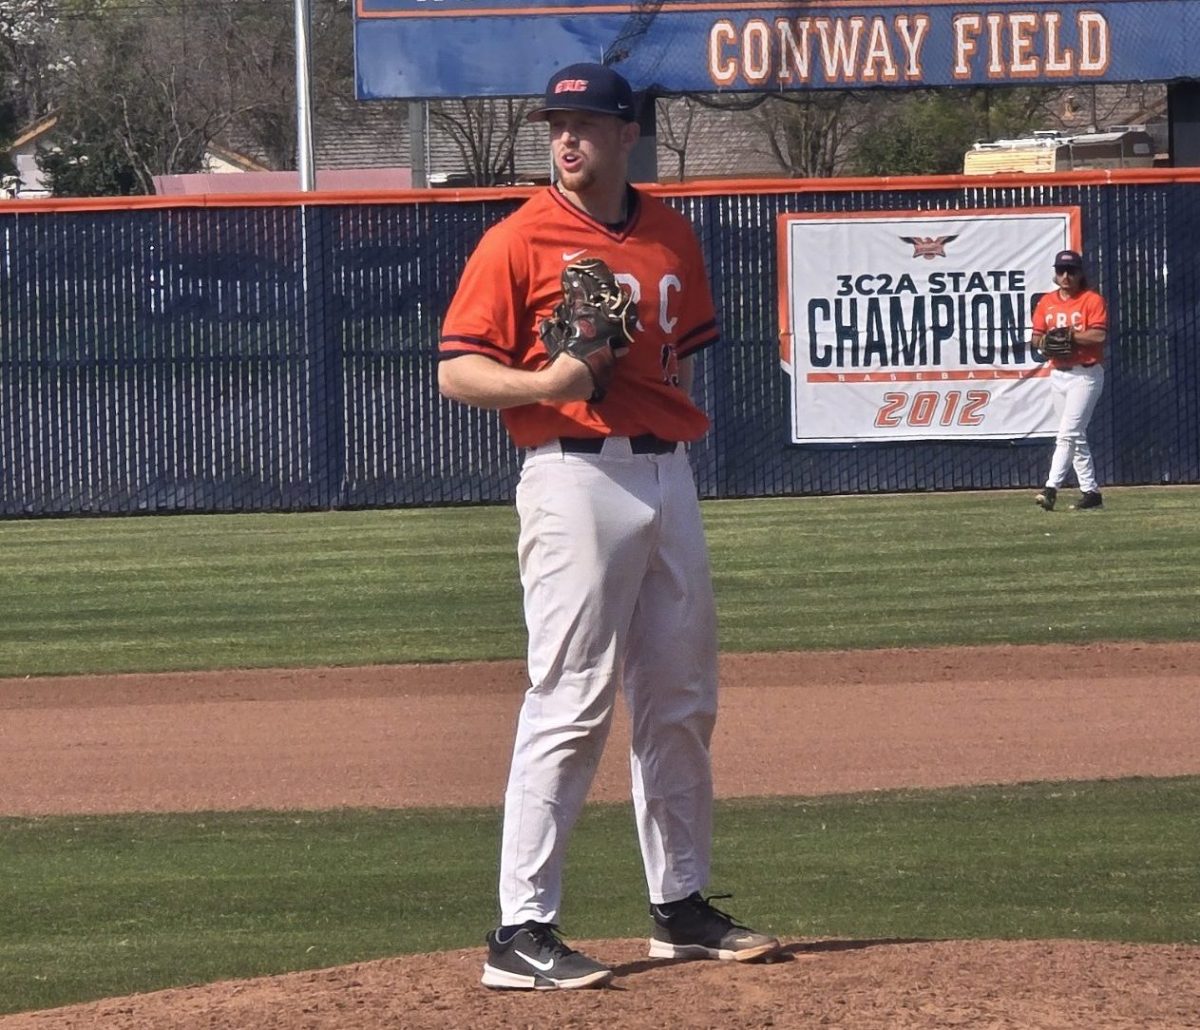 Sophomore+pitcher+Nolan+Craddock+prepares+for+a+pitch+against+the+Folsom+Lake+College+Falcons+on+March+21+at+Cosumnes+River+College.+The+Hawks+see+a+losing+streak+high+of+11+games+during+their+season+and+their+record+sits+at+13-19+after+losing+to+the+American+River+College+Beavers+in+game+two+of+their+three-game+series+on+April+3.